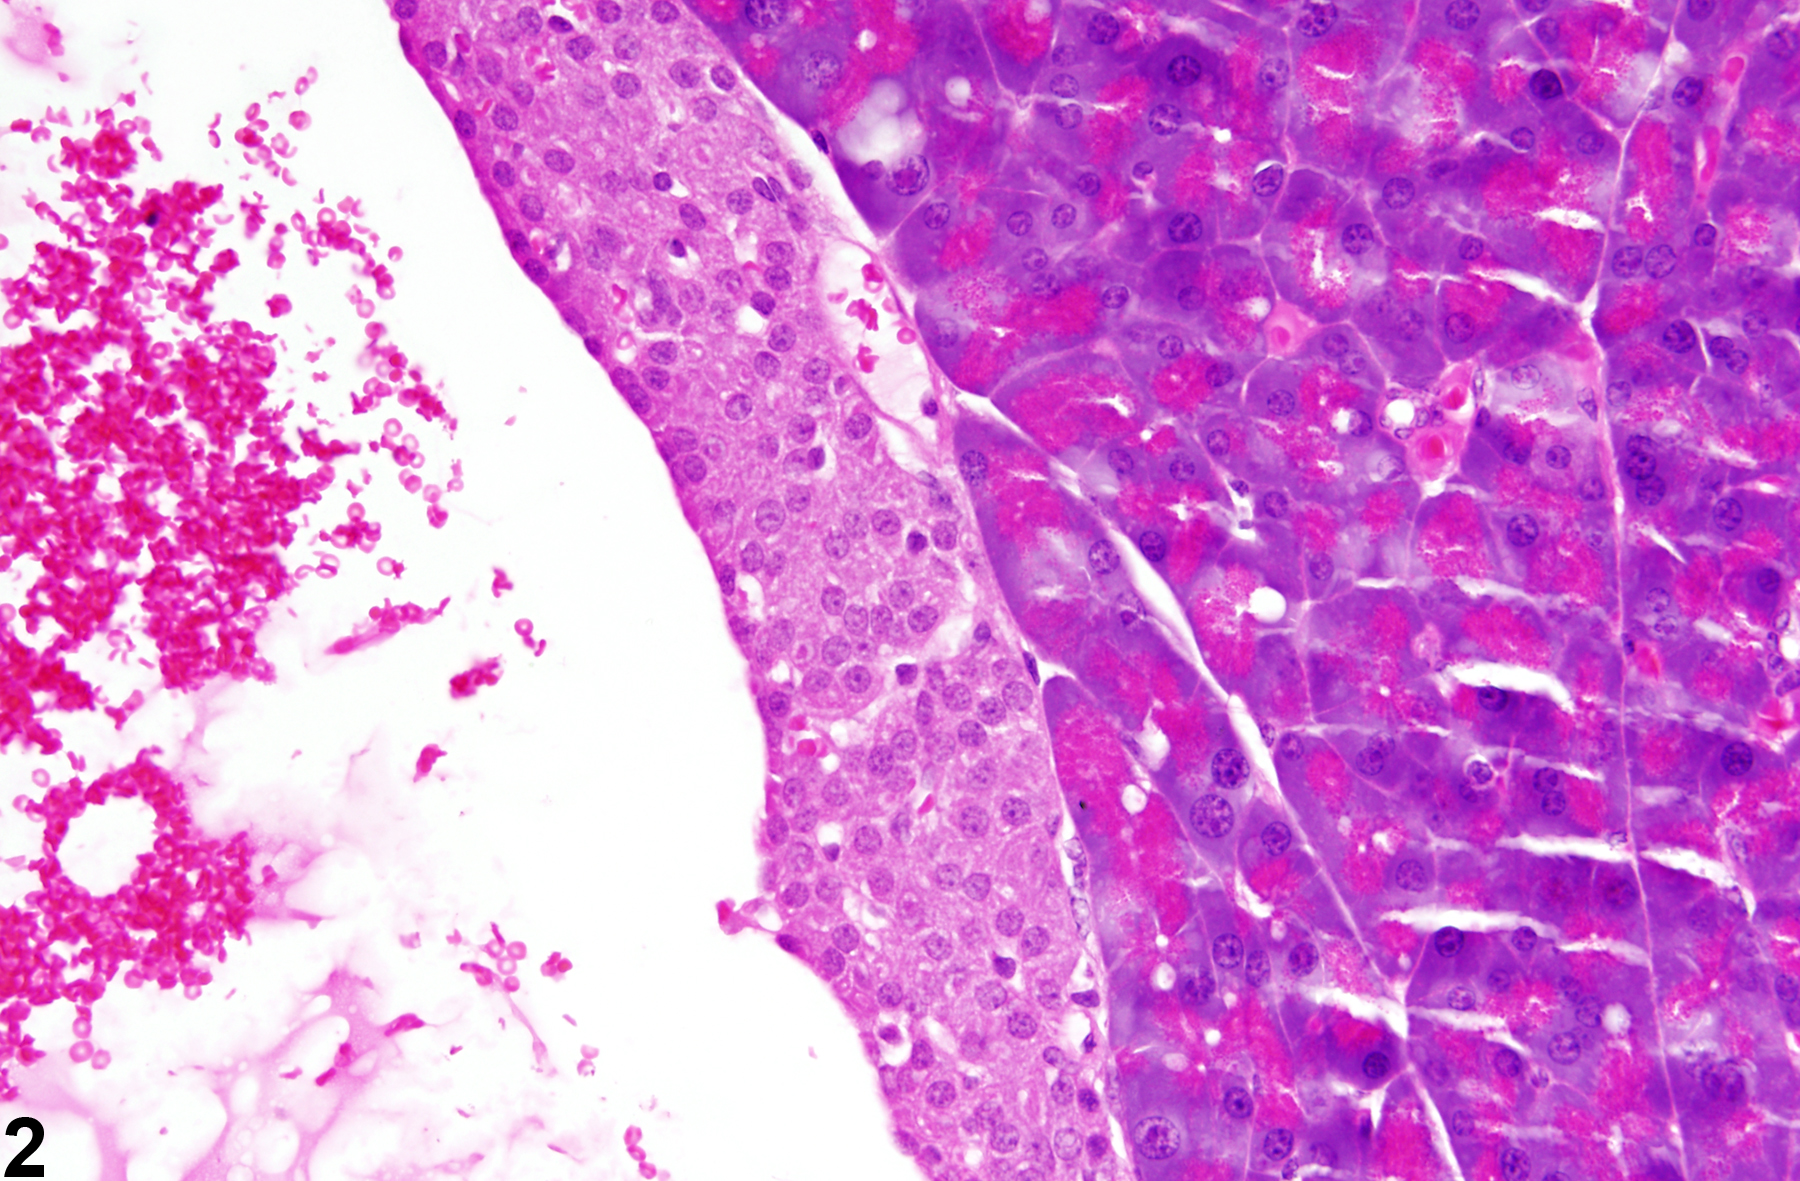 Image of cyst in the pancreatic islet from a male B6C3F1 mouse in a chronic study